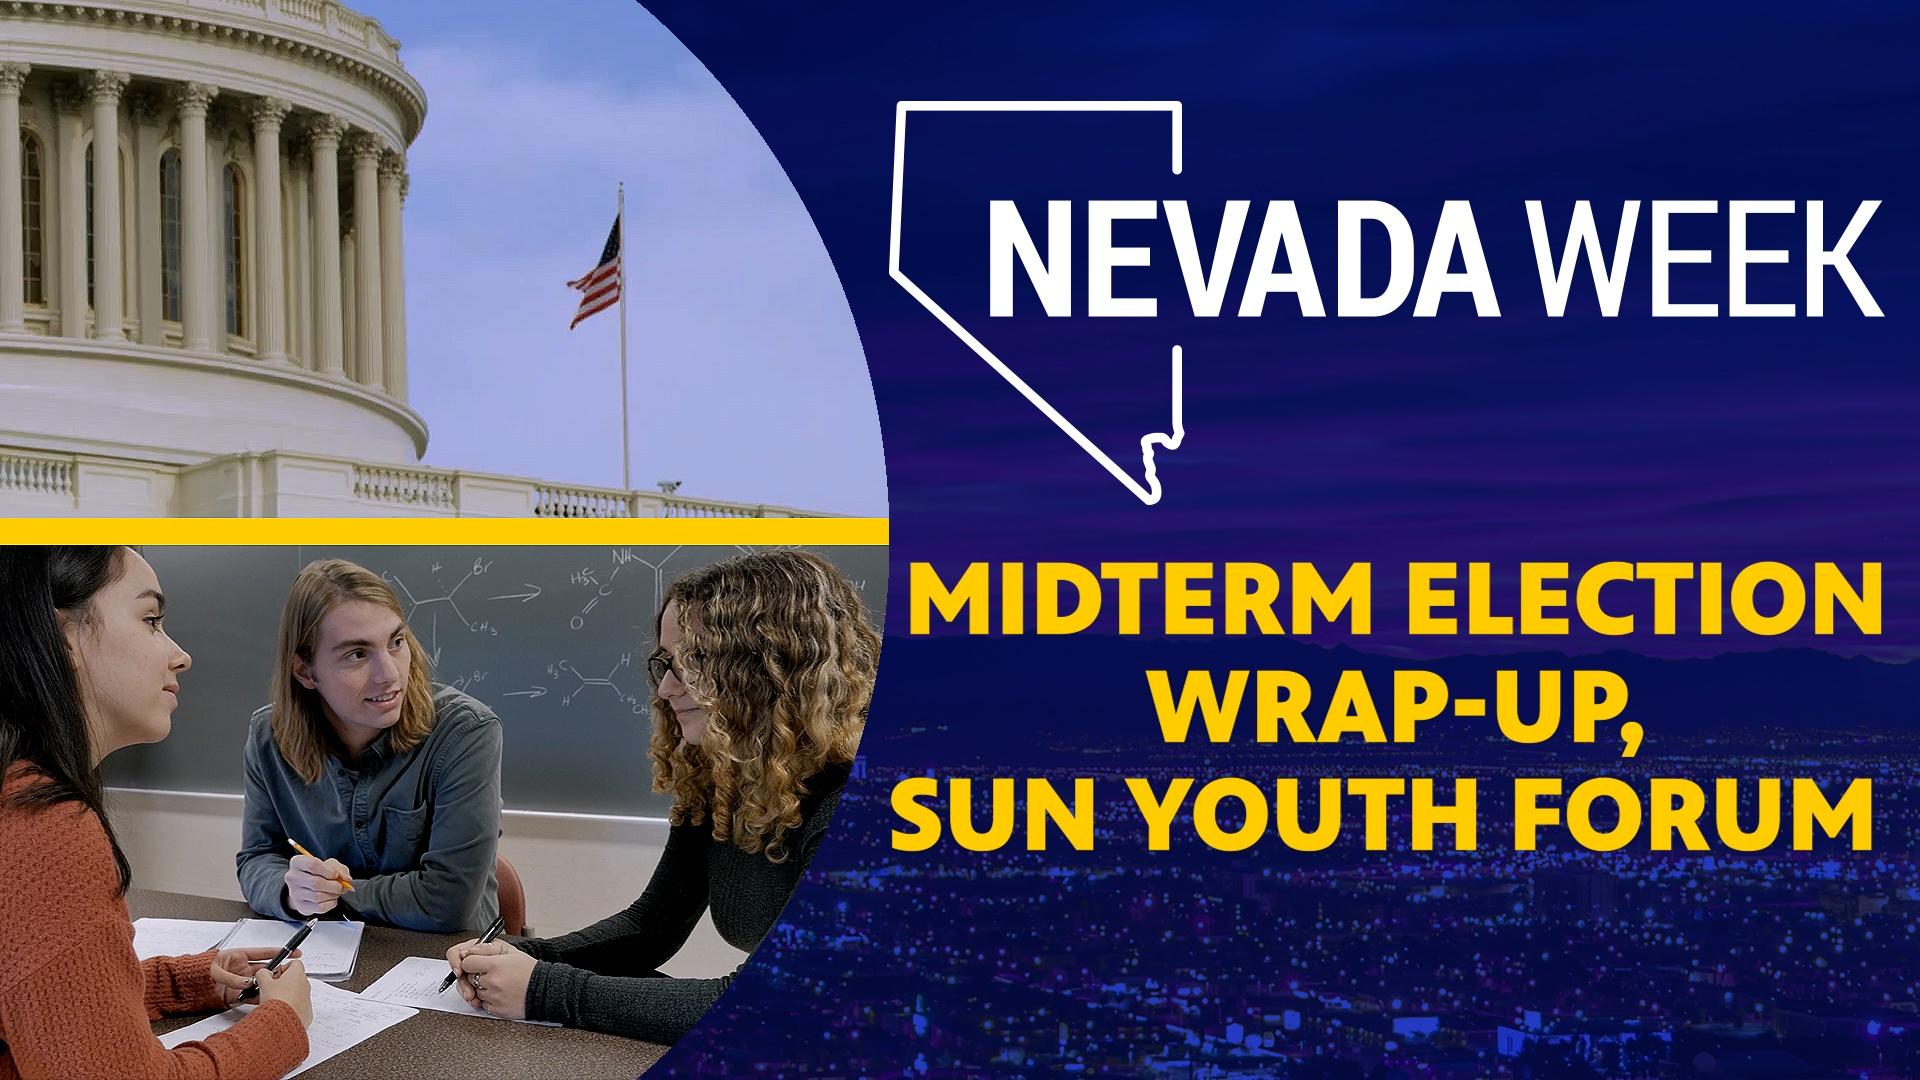 Midterm Election Wrap-Up, Sun Youth Forum